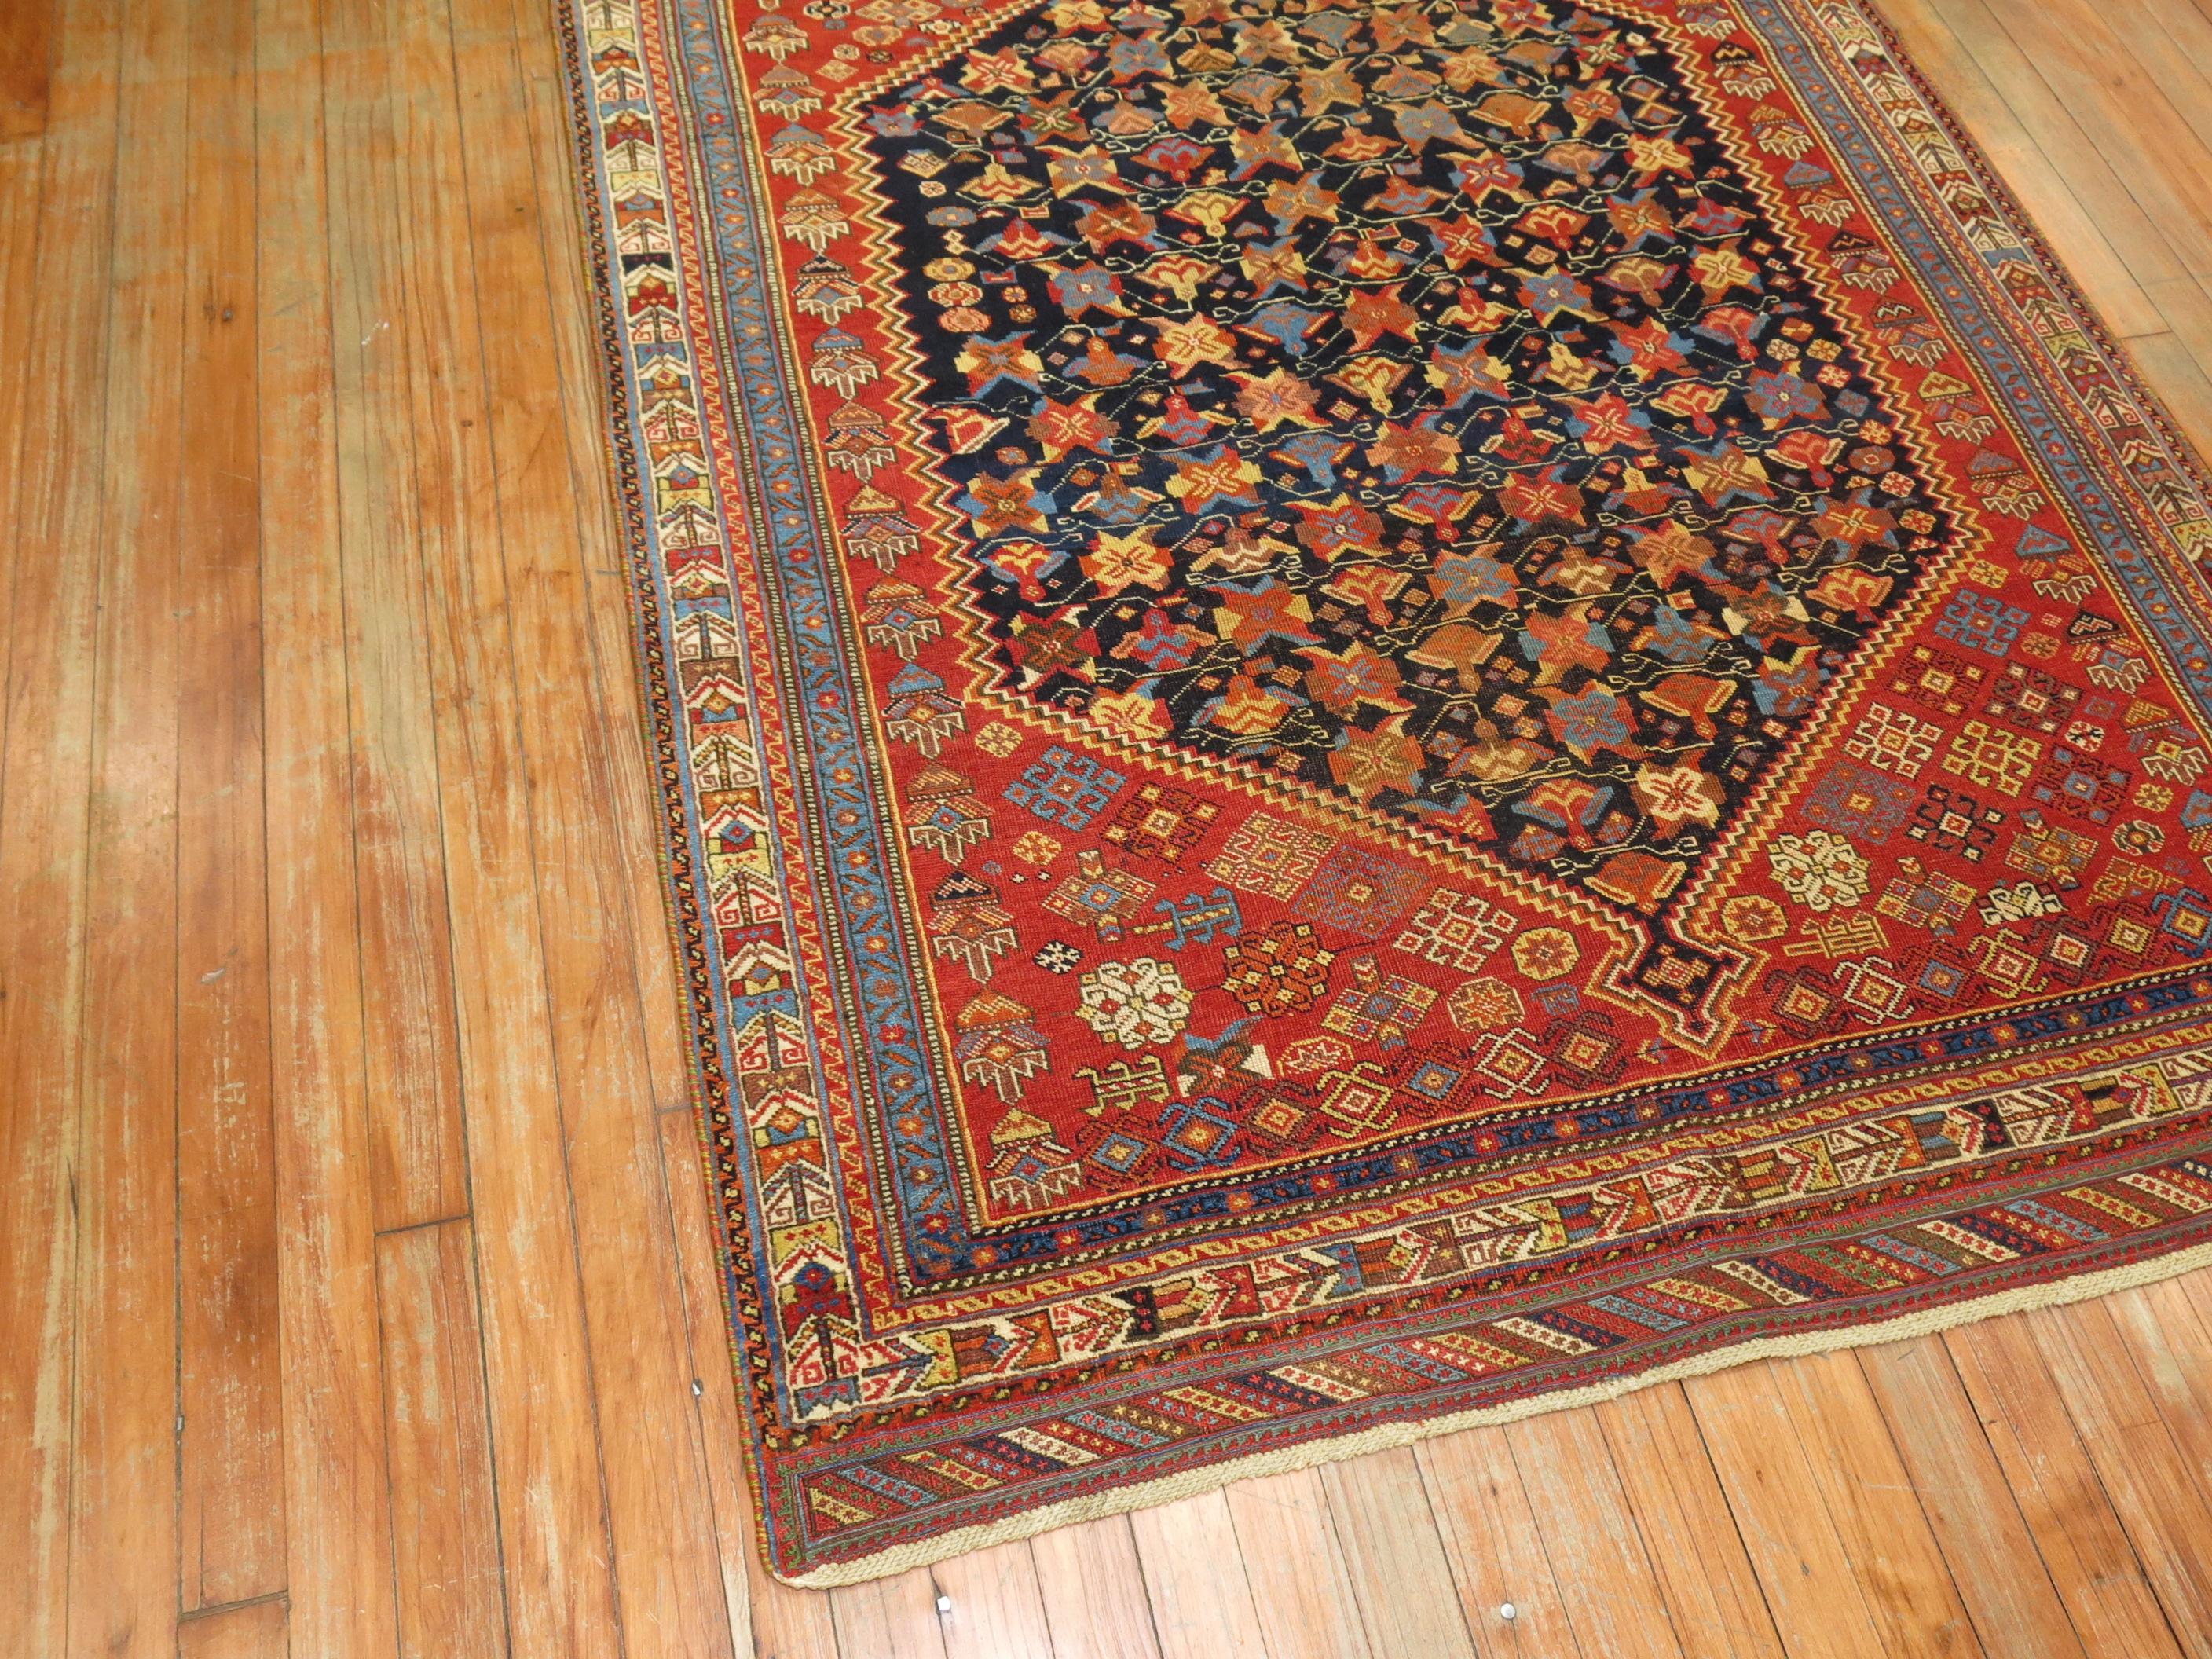 an early 20th century Tribal Jazzy color Persian Afshar rug. Lively crispy colors. The quality on this one is the finest of its type.

Measures: 4'3'' x 6'

High-quality antique Afshar rugs display deeply saturated dyeing techniques, and they